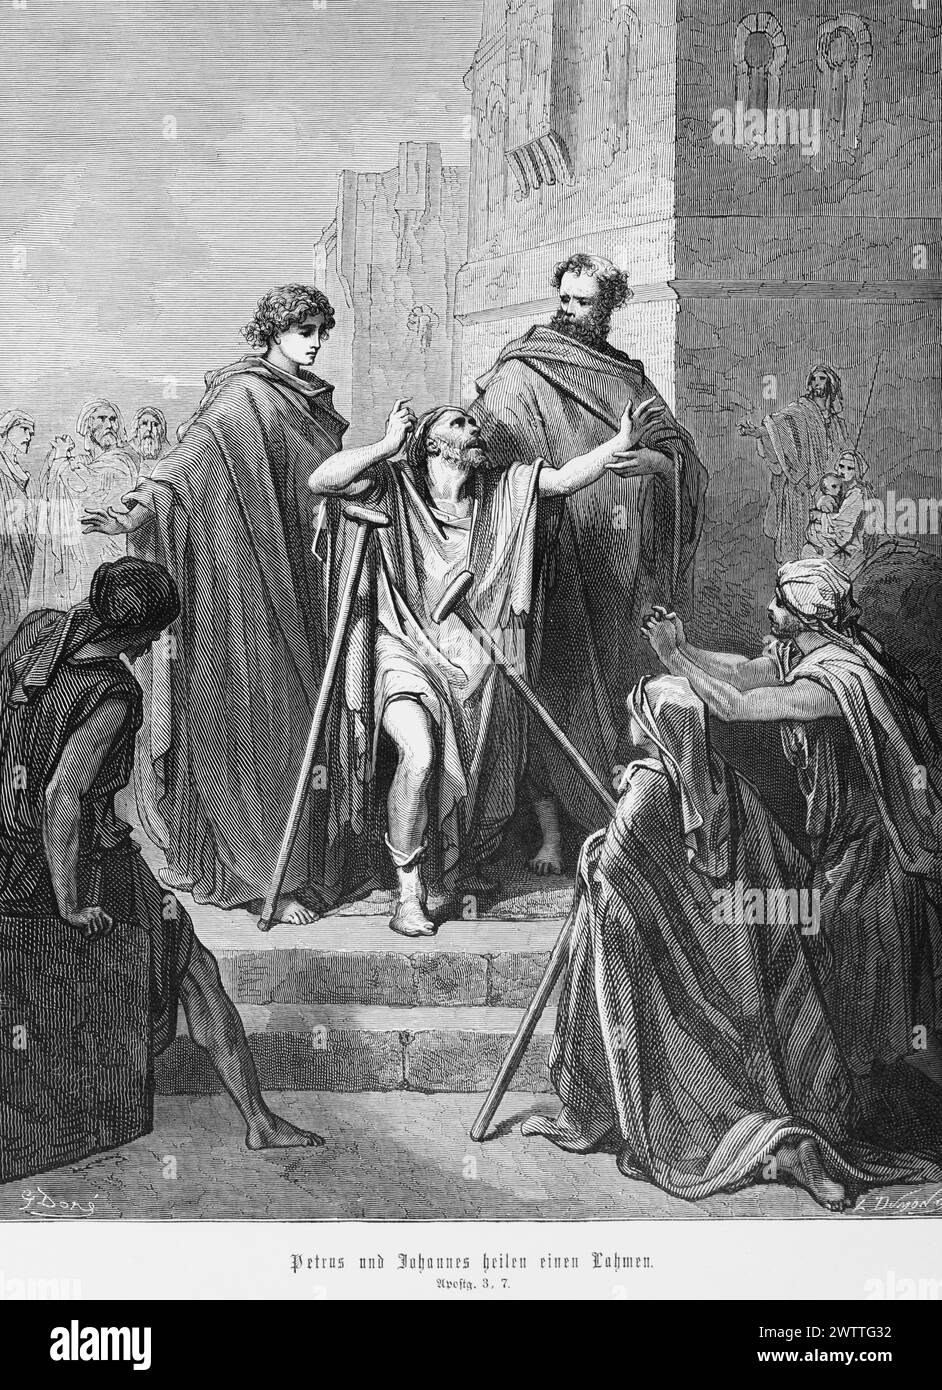 Peter and John heal a lame man,  Acts of the Apostles 3, New Testamemt, Bible, historical illustration 1886 Stock Photo